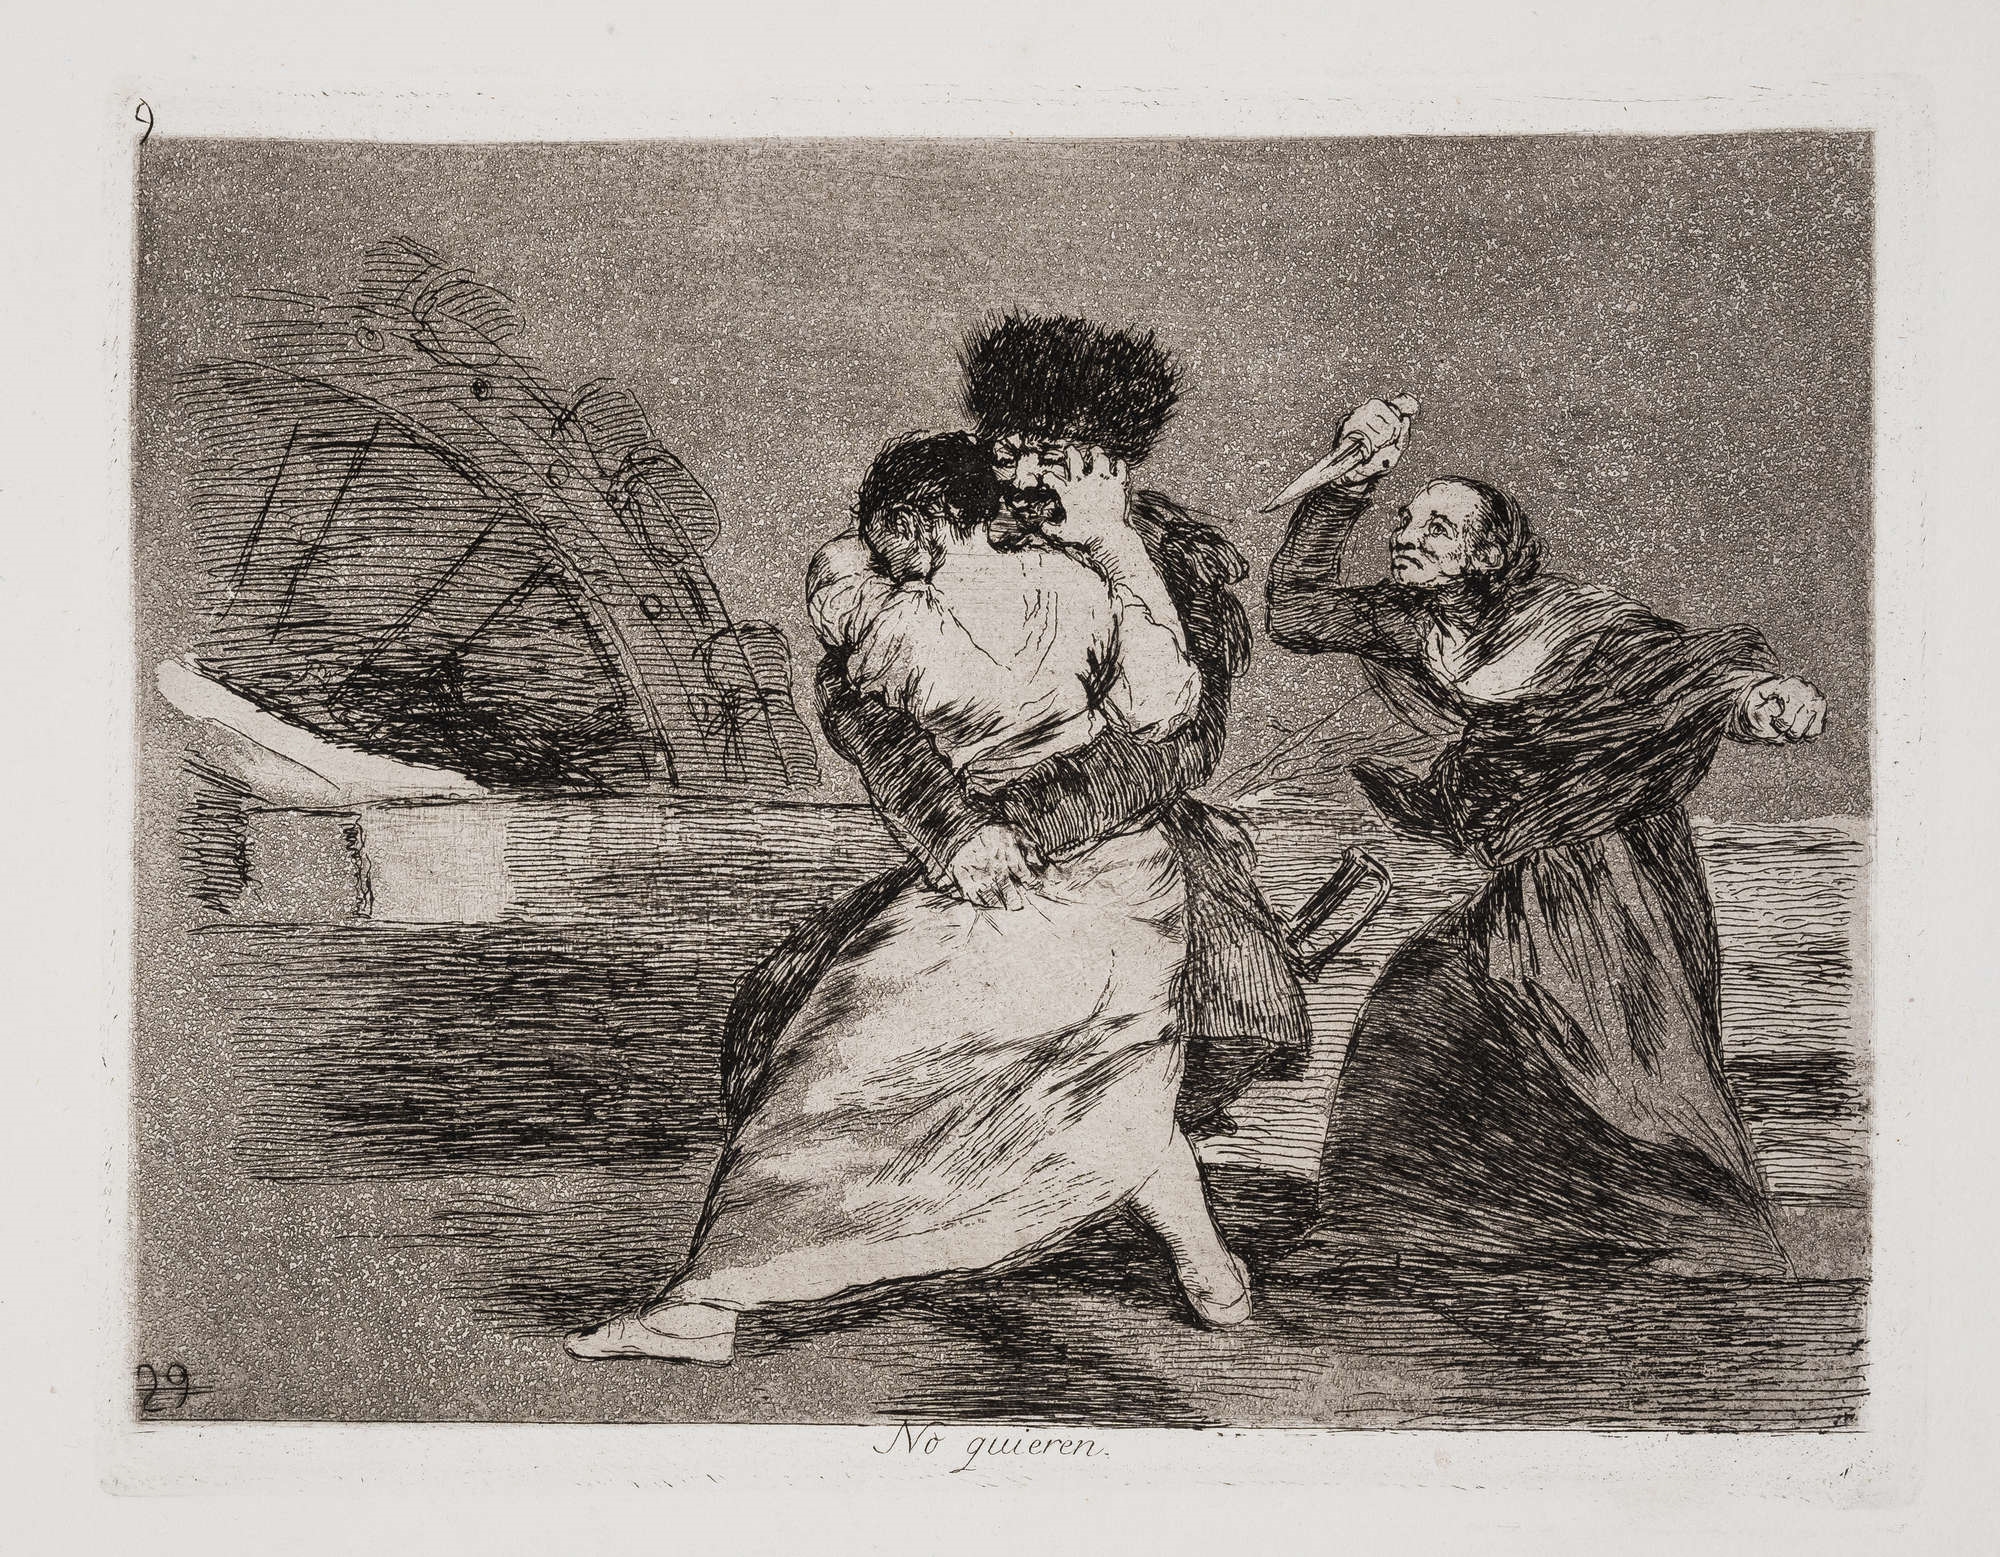 Artwork by Francisco José de Goya y Lucientes, Three plates from 'The Disasters of War', Made of etchings and aquatint